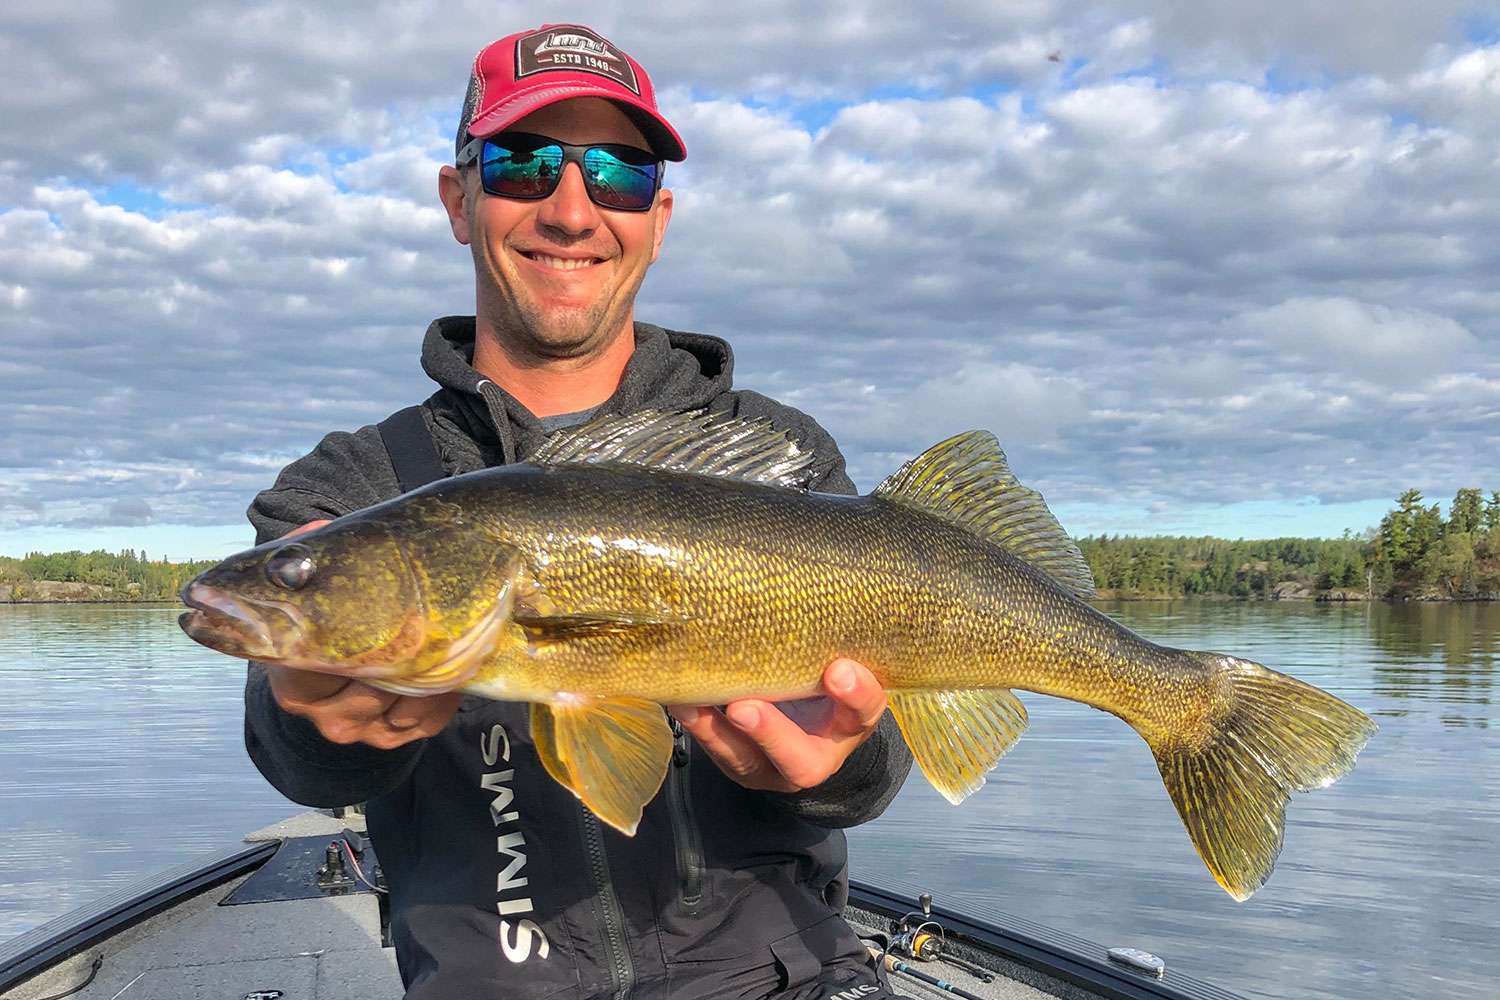 <b>What is your favorite food?</b></p>
<p>Lake of the Woods walleye. Thatâs where I live. Itâs probably one of the best walleye fisheries in the world, so I eat a lot of them when Iâm at home.